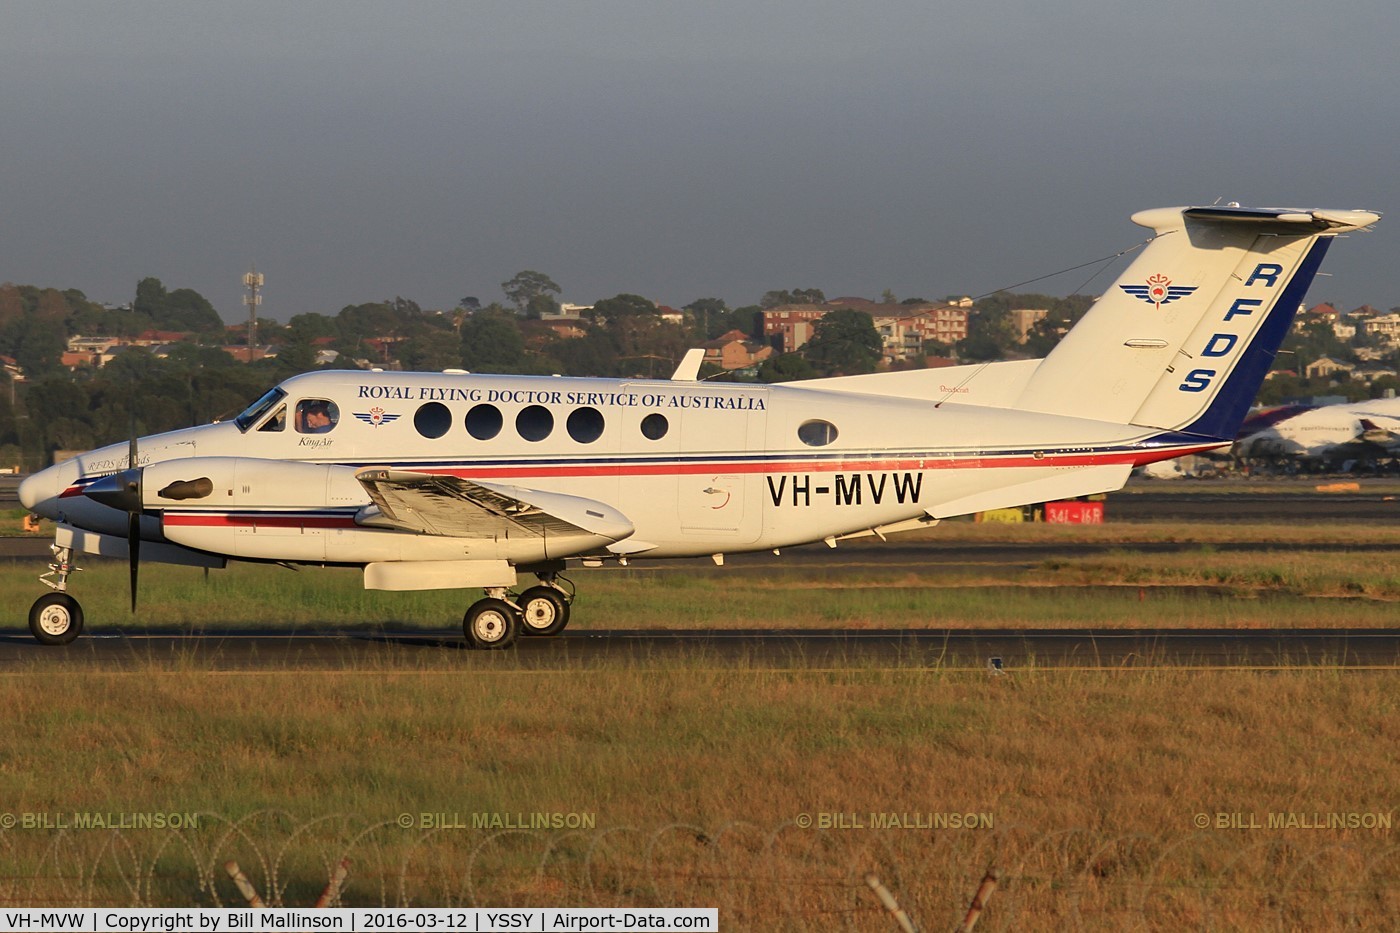 VH-MVW, 2003 Raytheon B200 King Air C/N BB-1814, away on another mission